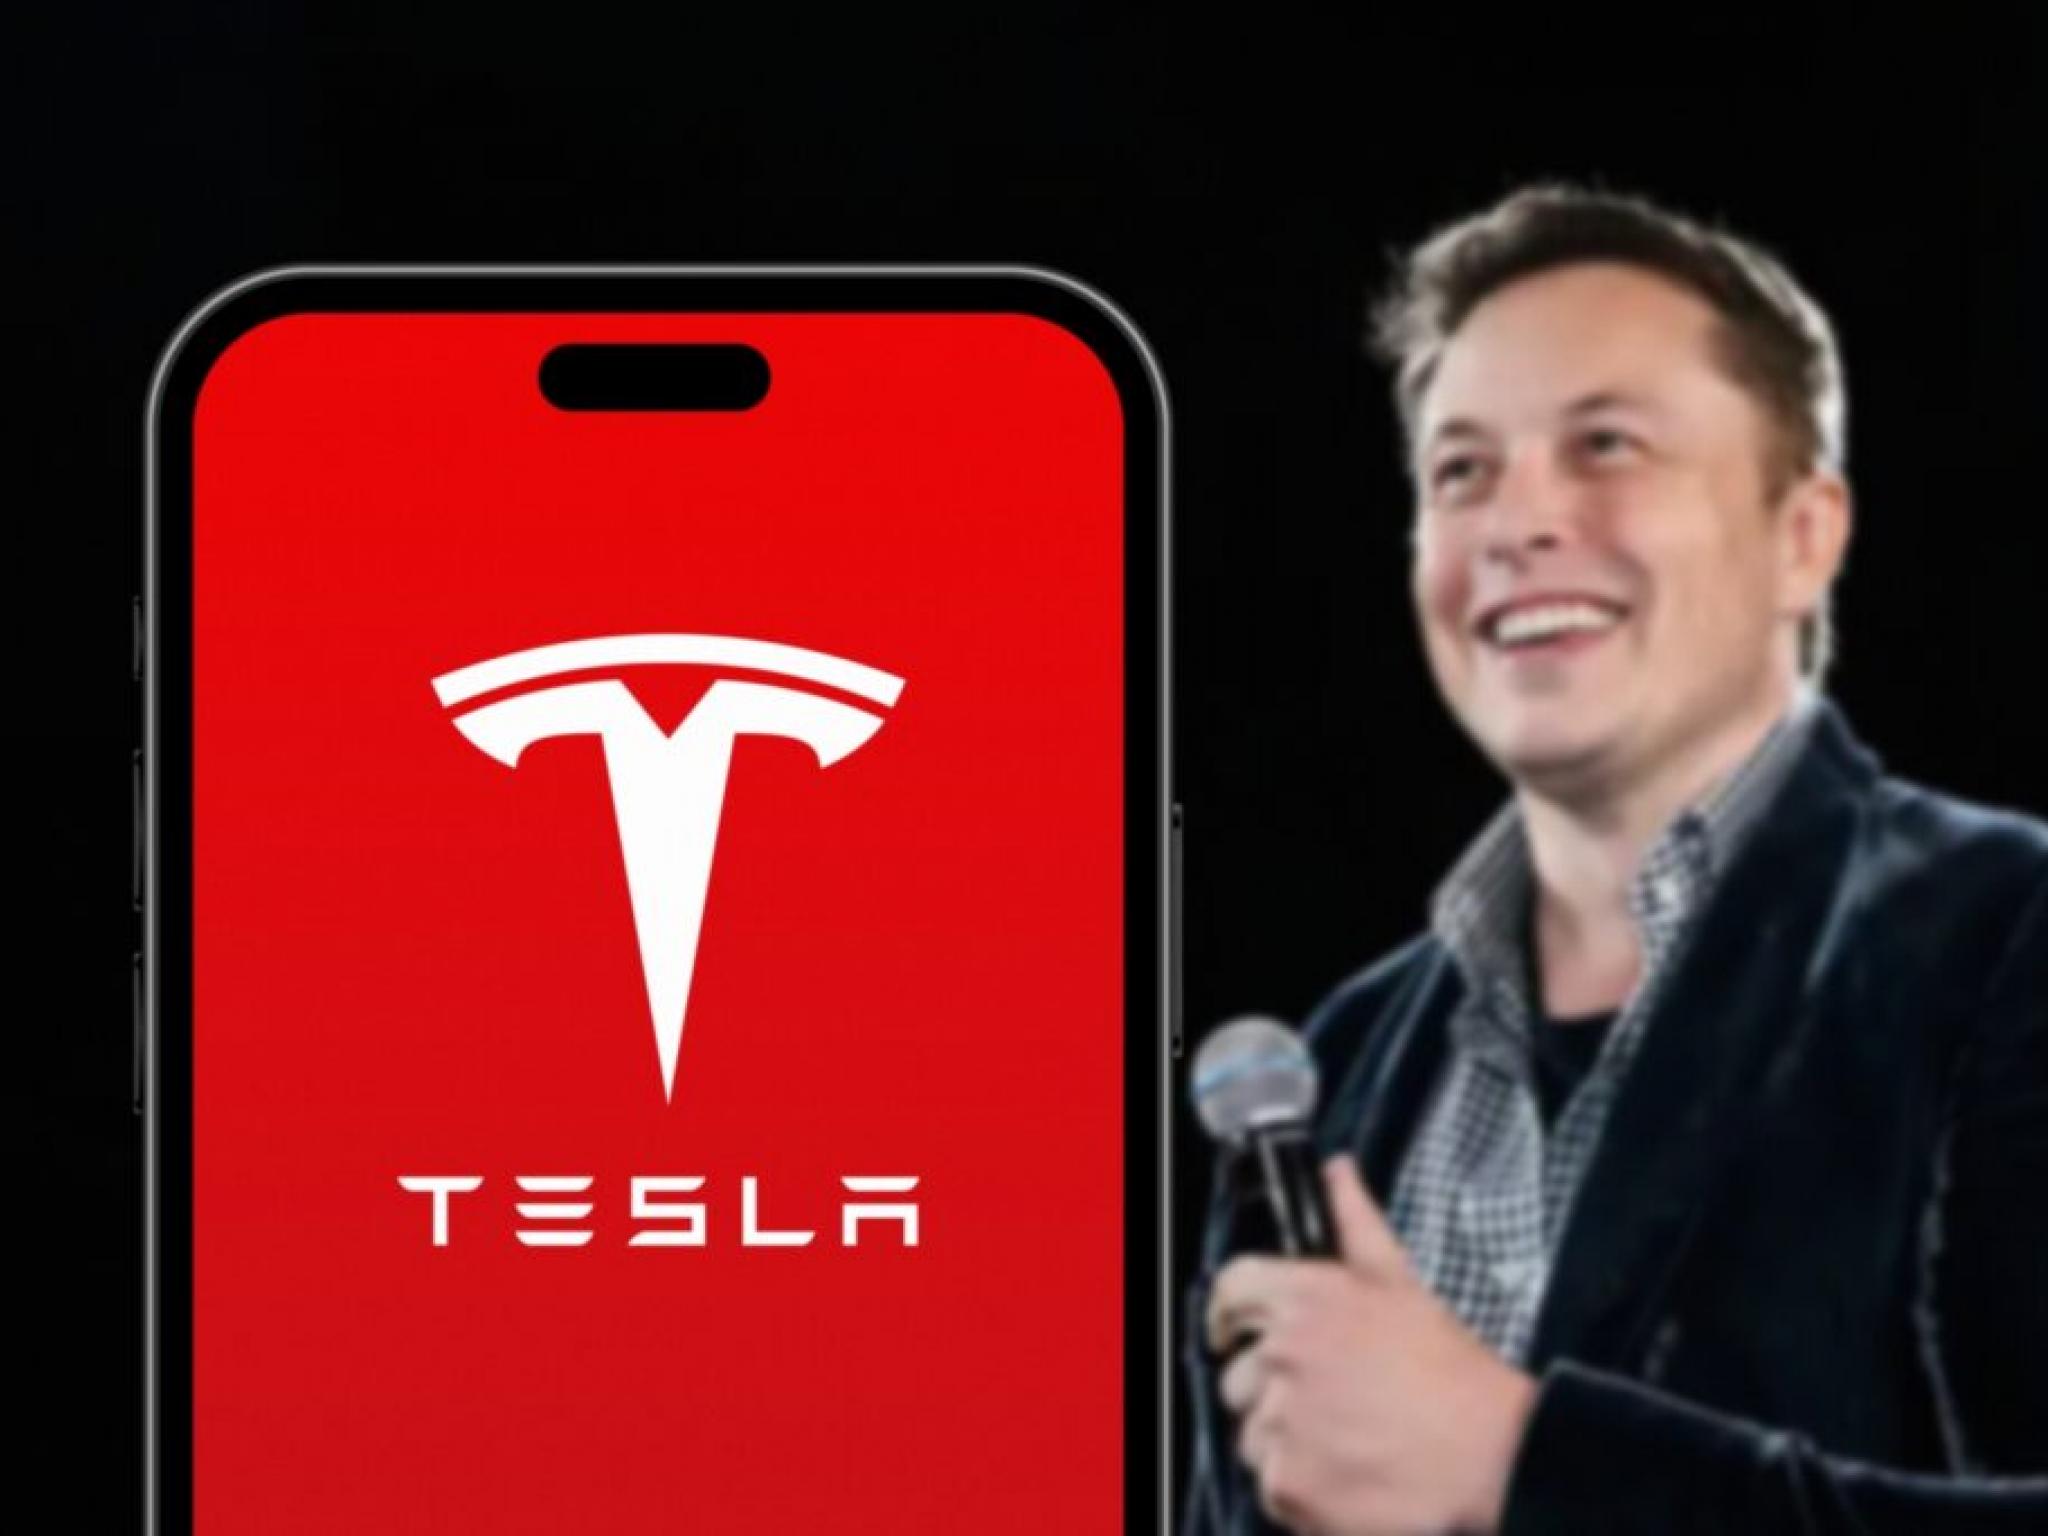  elon-musks-tesla-is-now-a-meme-stock-says-economist-the-market-does-not-particularly-care 